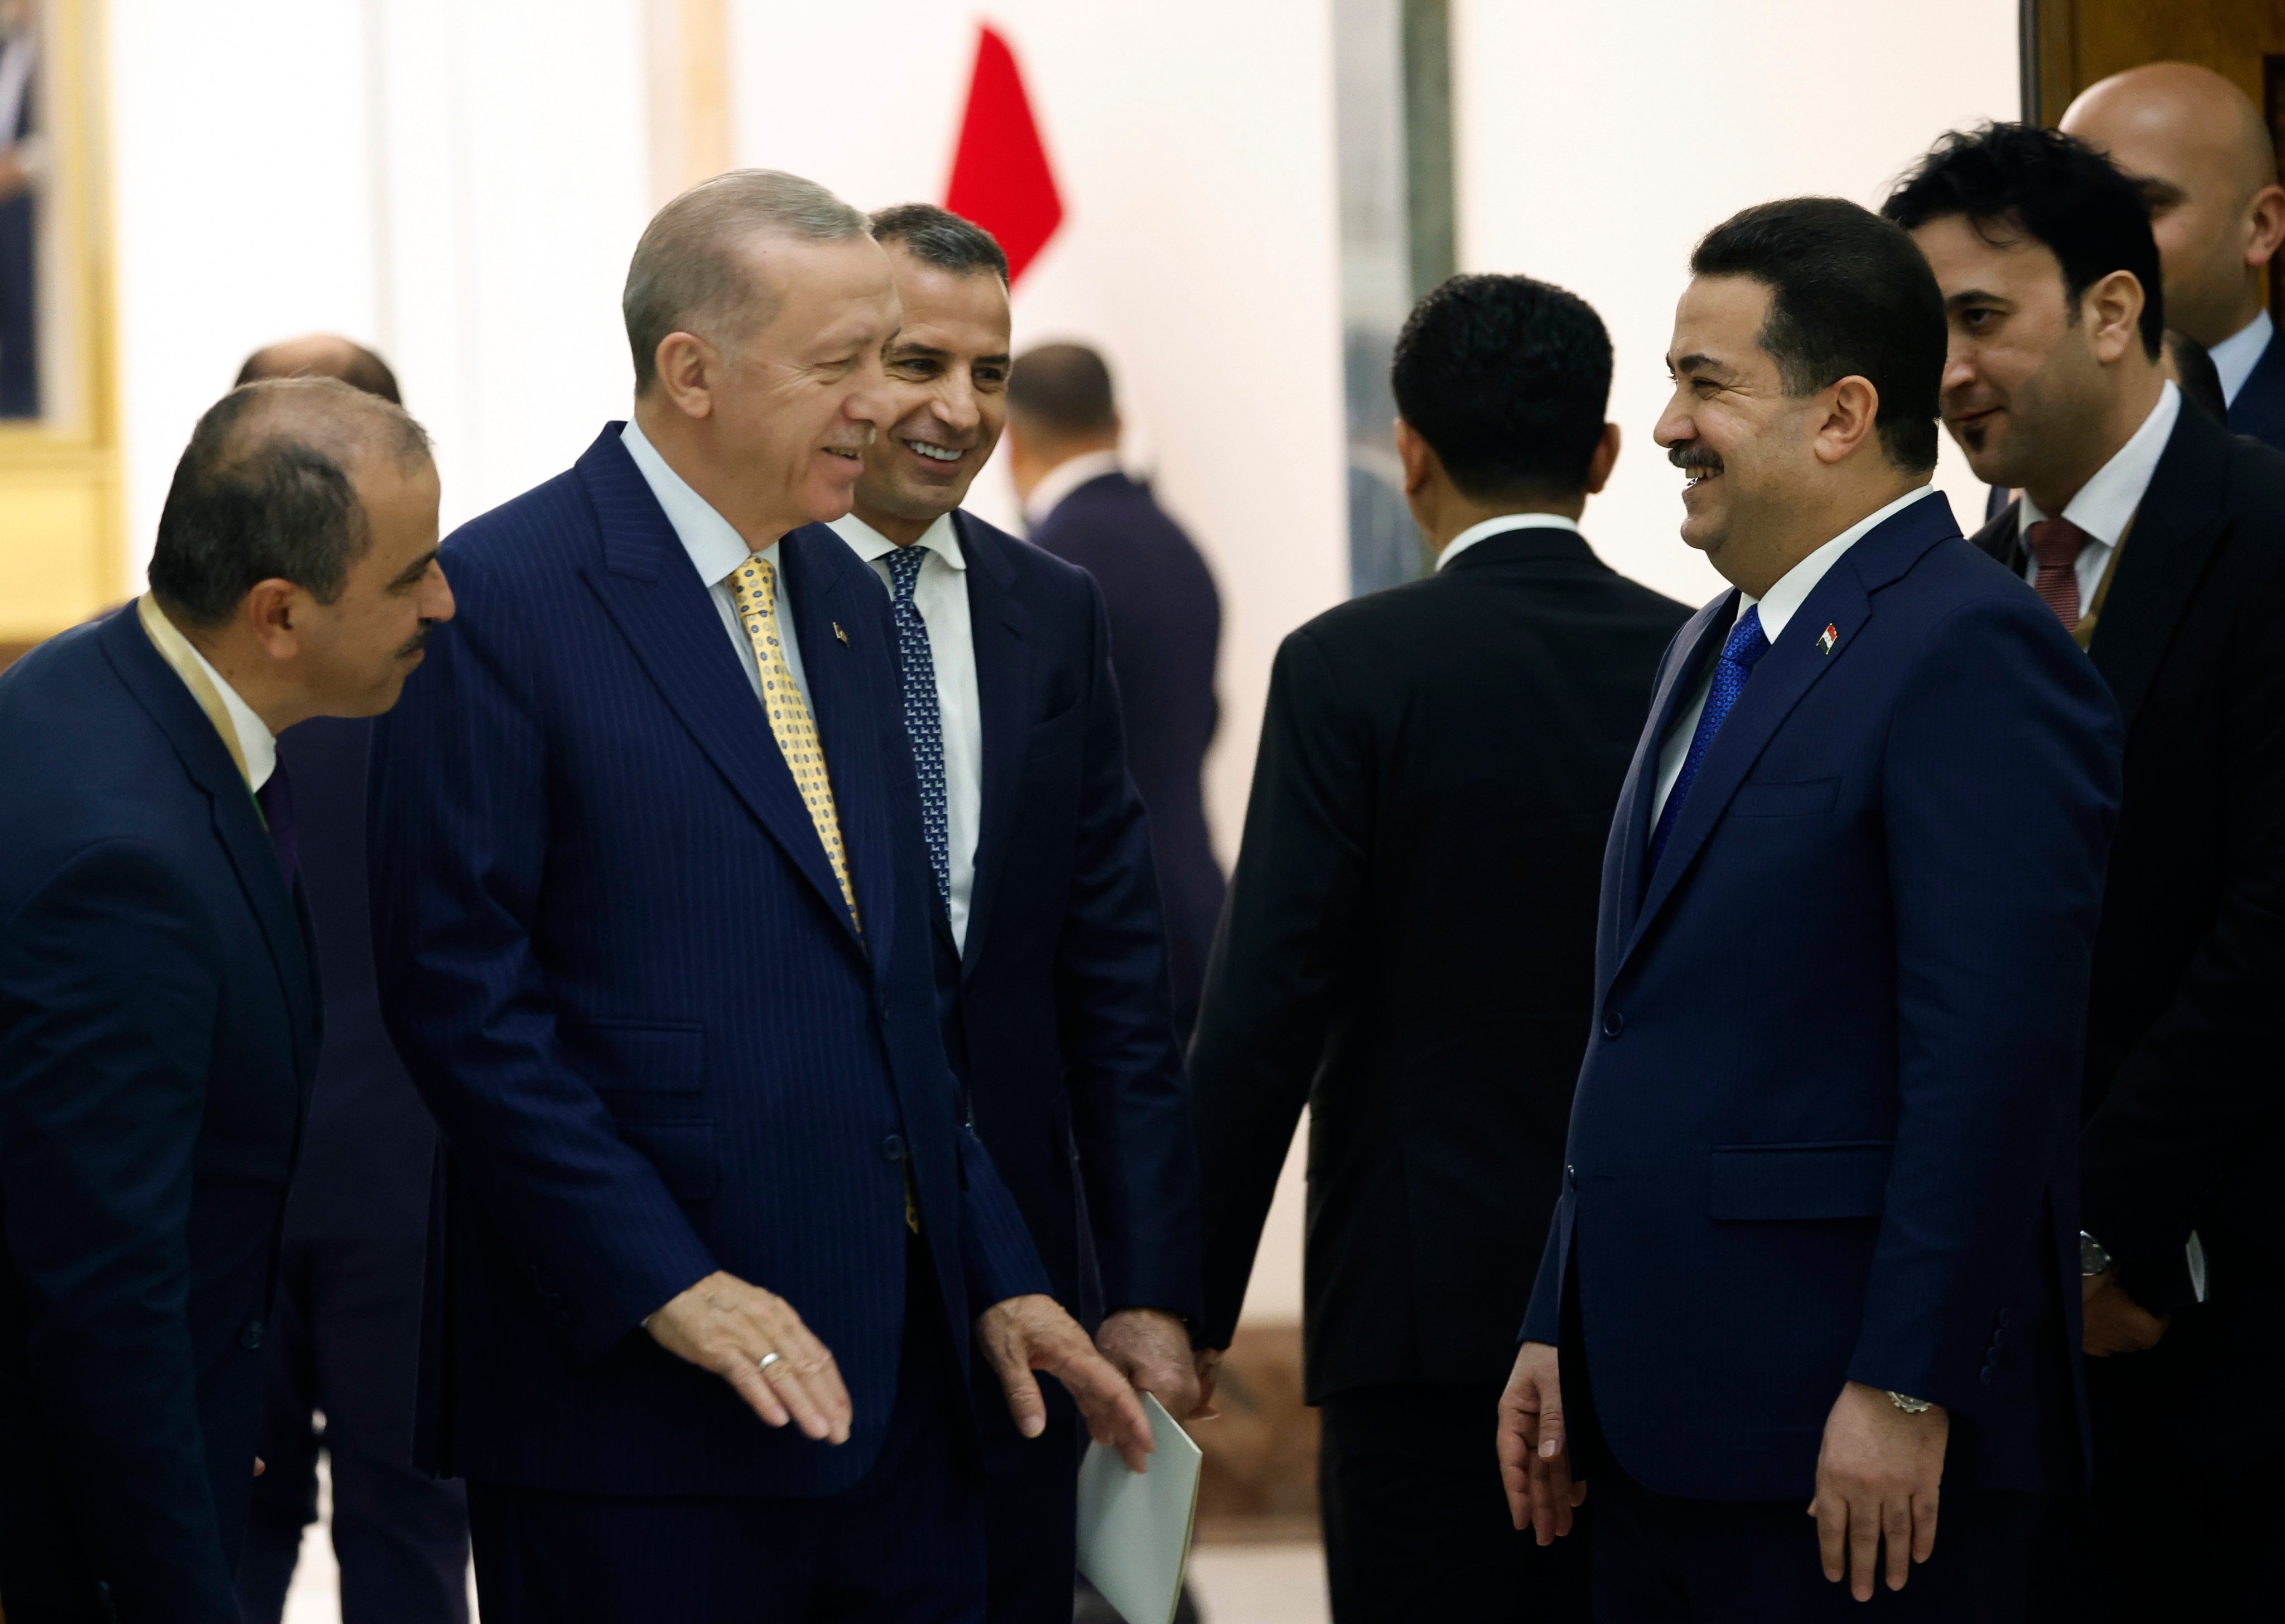 Turkish President Recep Tayyip Erdogan (second left) and Iraqi Prime Minister Mohammed Shia al-Sudani (foreground, right) attend the ceremony to sign a four-way memorandum of understanding between Iraq, Turkey, Qatar and the UAE to cooperate in the Development Road project, in Baghdad, Iraq, on April 22. Photo: AP